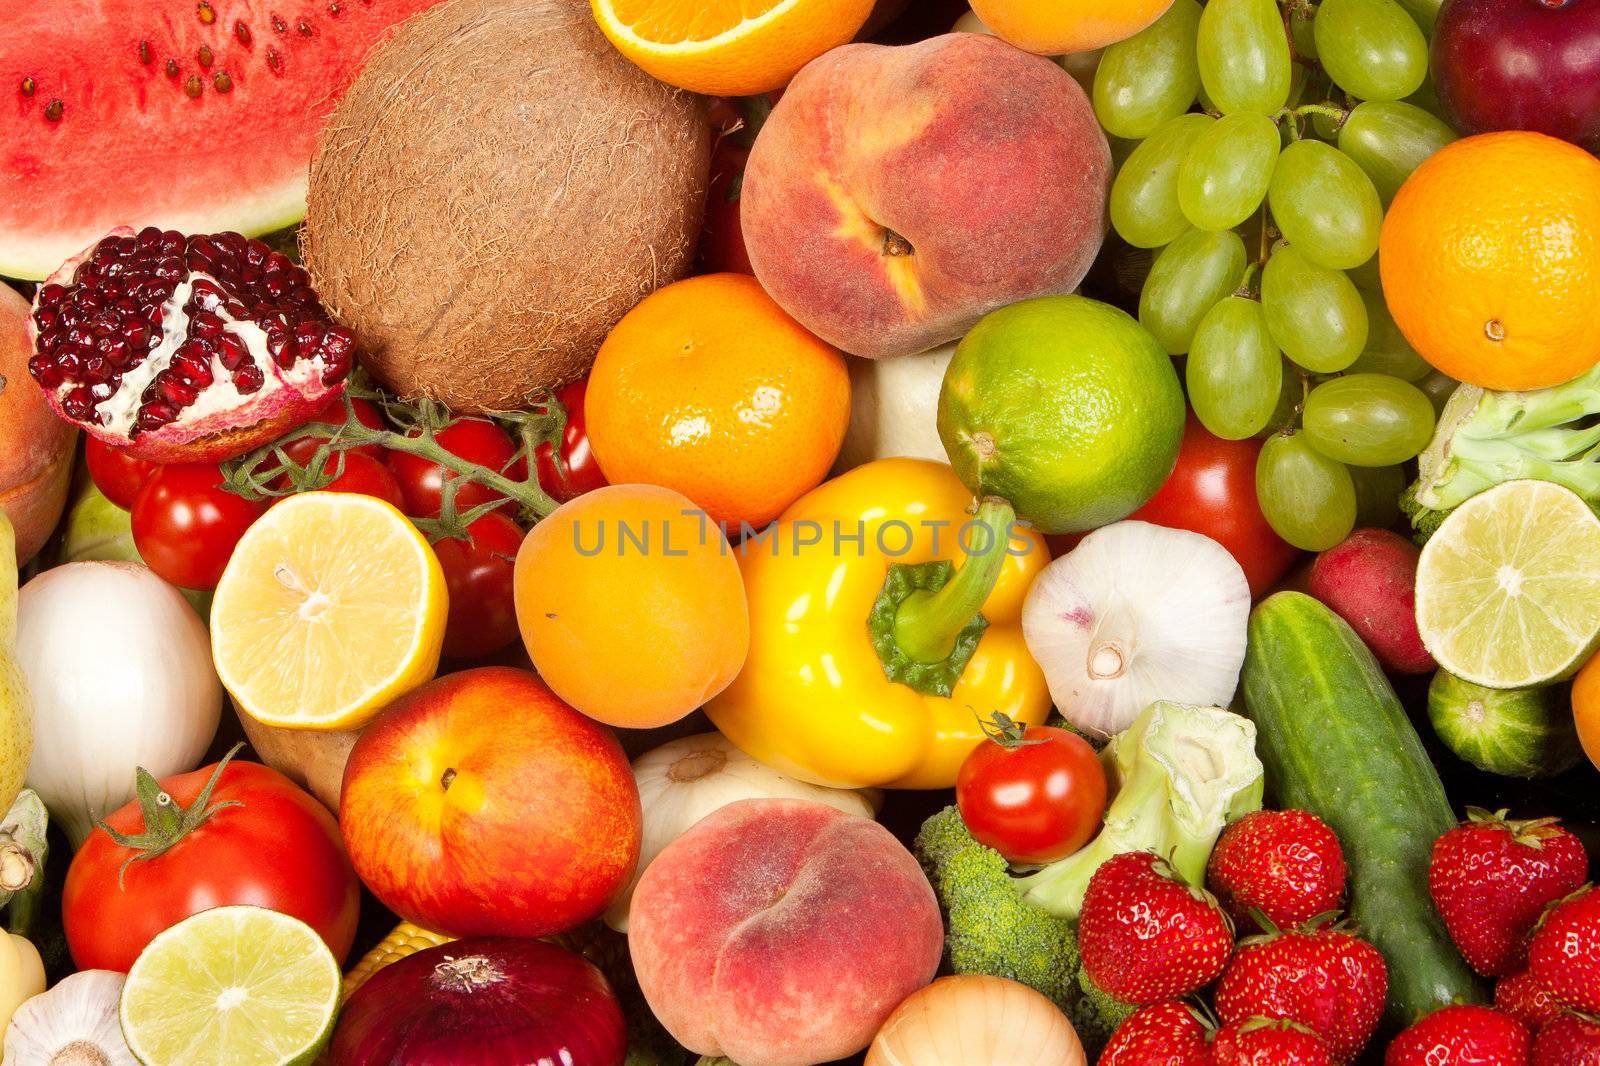 Huge group of fresh vegetables and fruits isolated on a white background. Shot in a studio